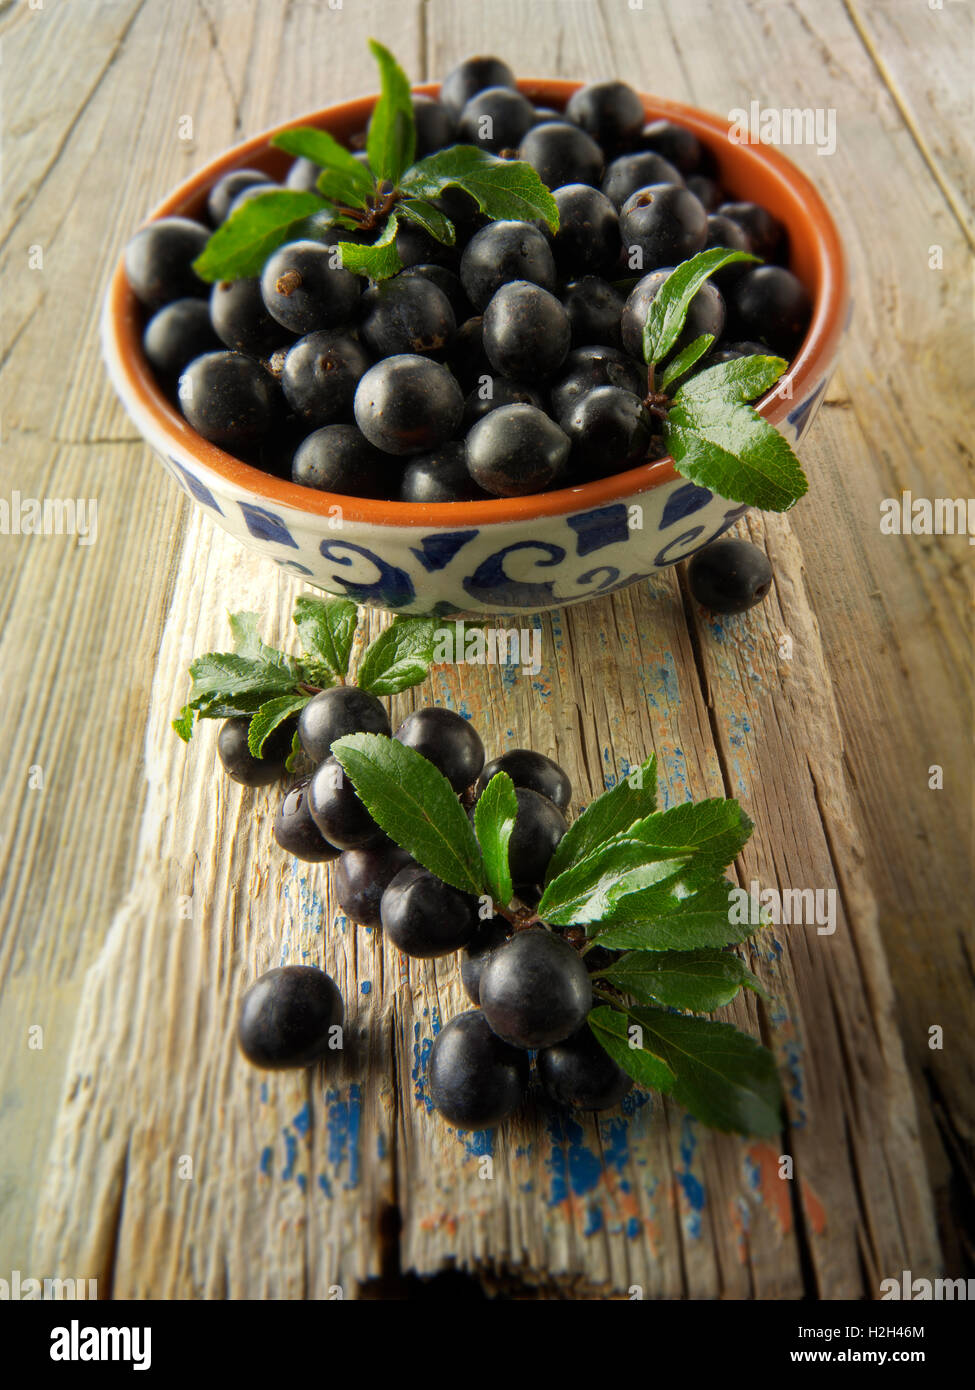 Fresh picked sloe berries and leaves from the blackthorn bush (Prunus spinosa ) Stock Photo